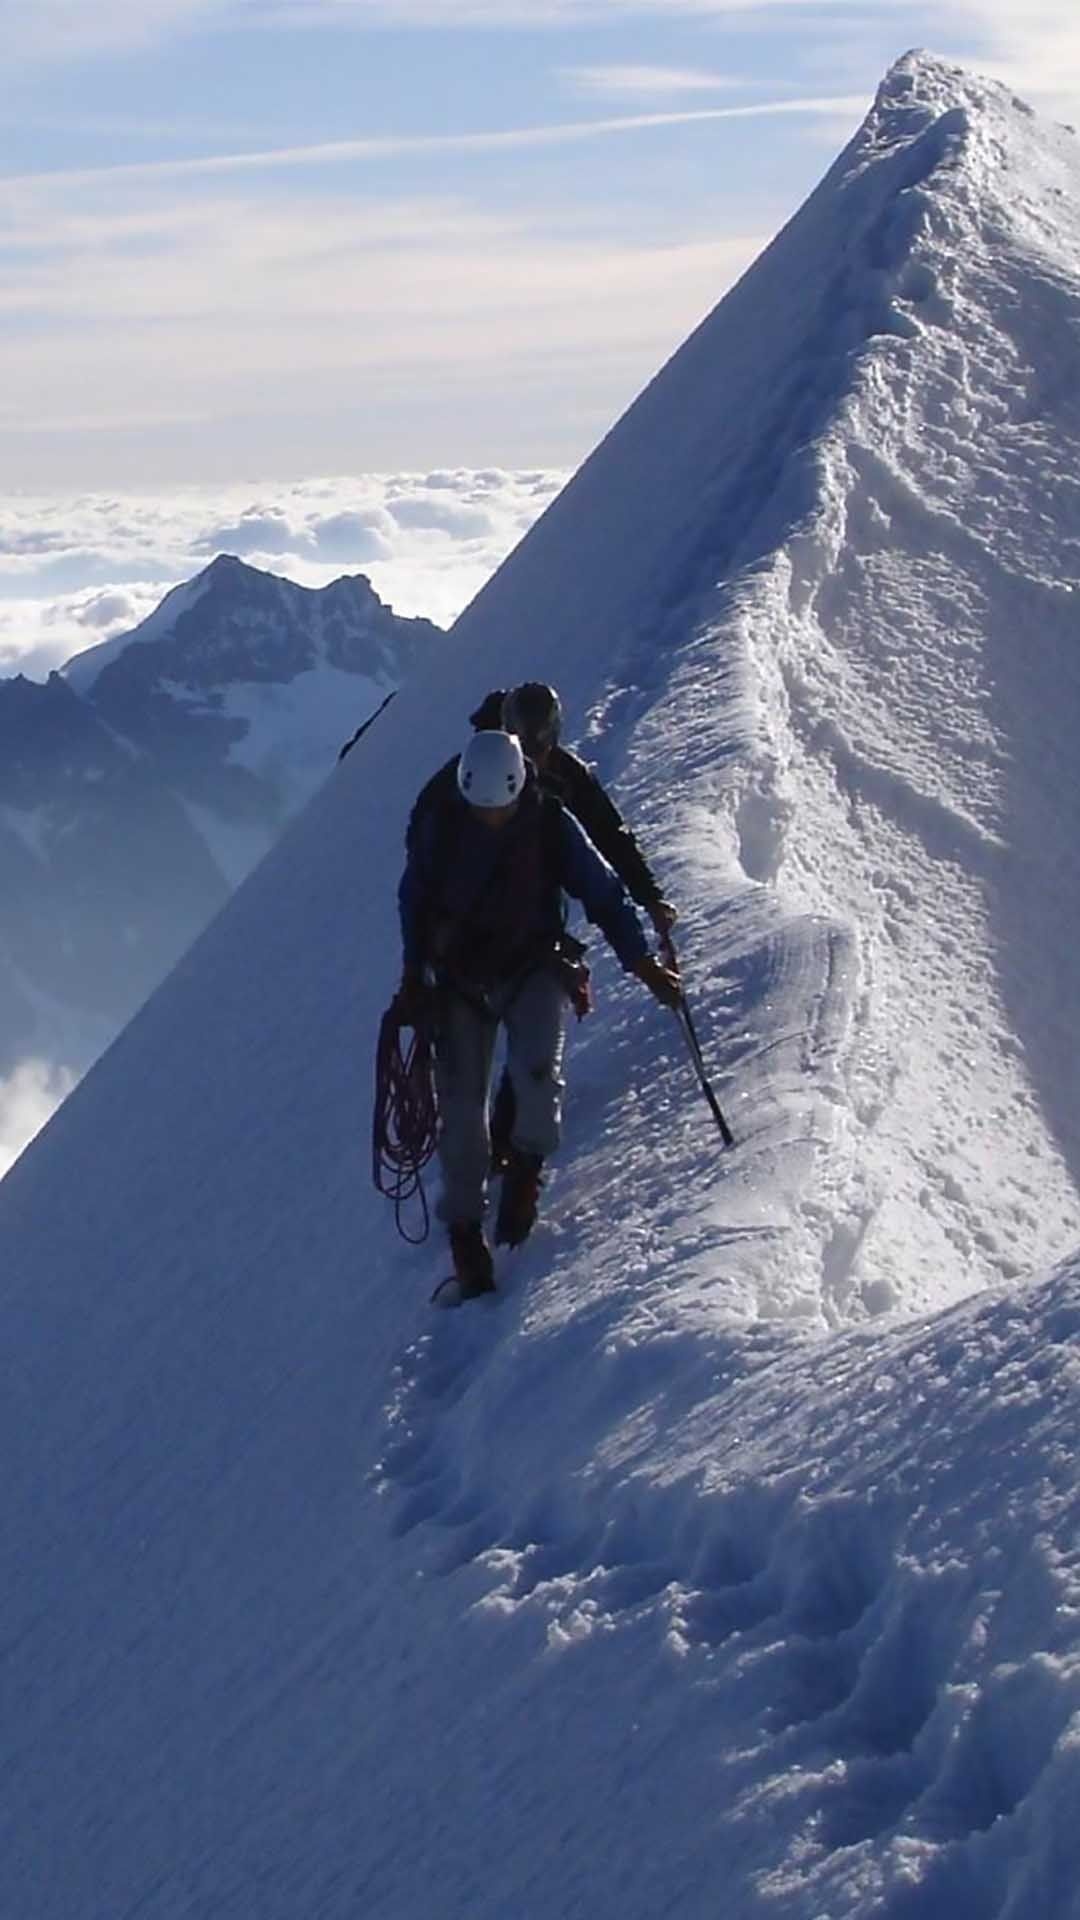 Climbing, Adventure wallpapers, Nature's challenge, Mountaineering passion, 1080x1920 Full HD Phone